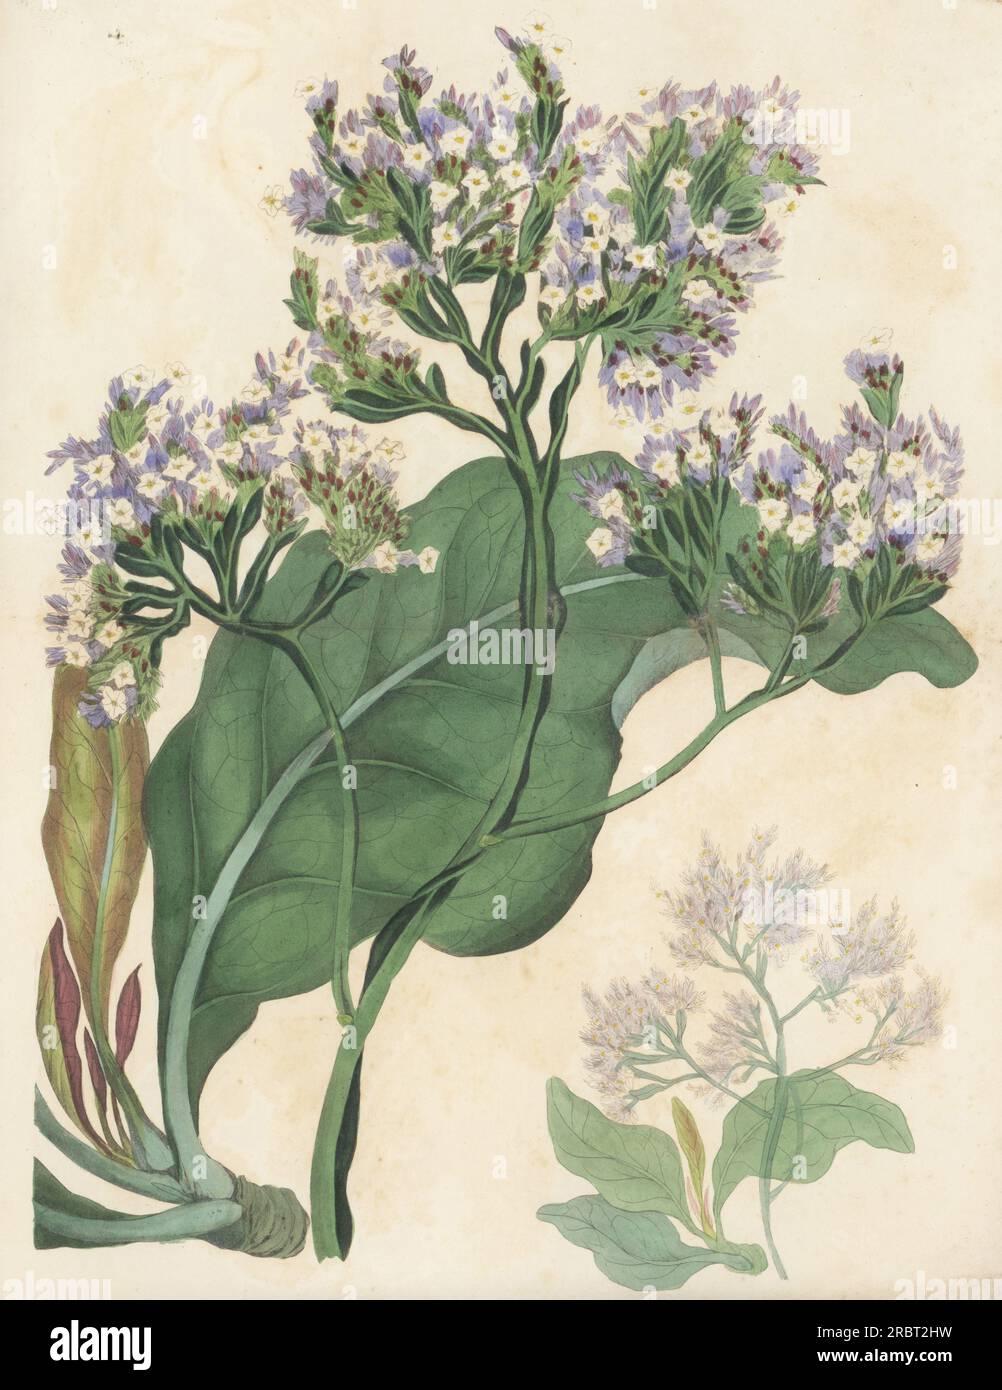 Sea lavender, Limonium arboreum. Native of the Canary Islands, found on Tenerife by English botanist Philip Barker-Webb. Drawn at Exeter Nursery. Arboreus statice, Statice arborea. Handcoloured engraving after a botanical illustration by Miss Morrish from Joseph Paxton’s Magazine of Botany, and Register of Flowering Plants, Volume 4, Orr and Smith, London, 1837. Stock Photo